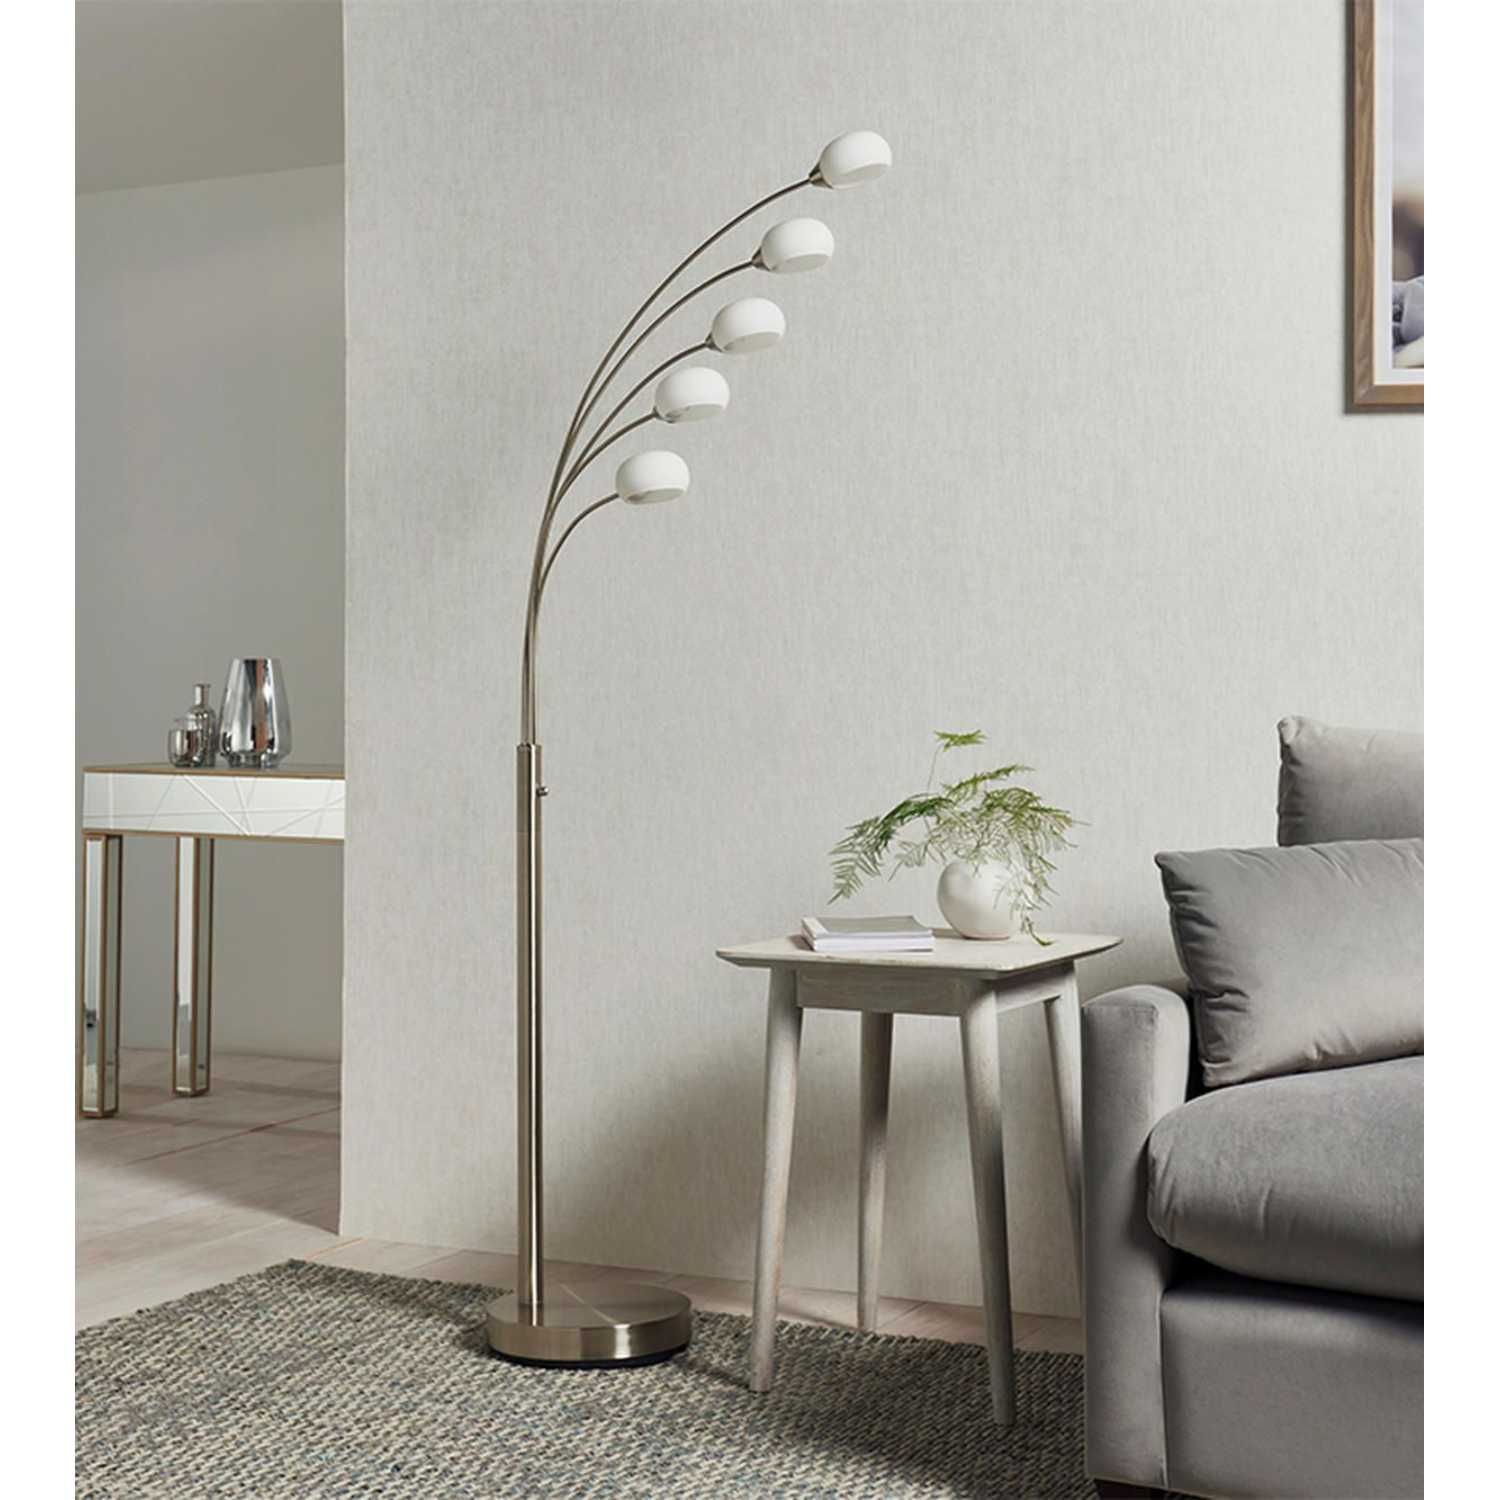 Vintage Silver Steel 5 Arm Dimmable Floor Lamp In Satin Nickel Finish With  White Glass – Cms Furniture With Regard To Silver Steel Floor Lamps (Photo 8 of 15)